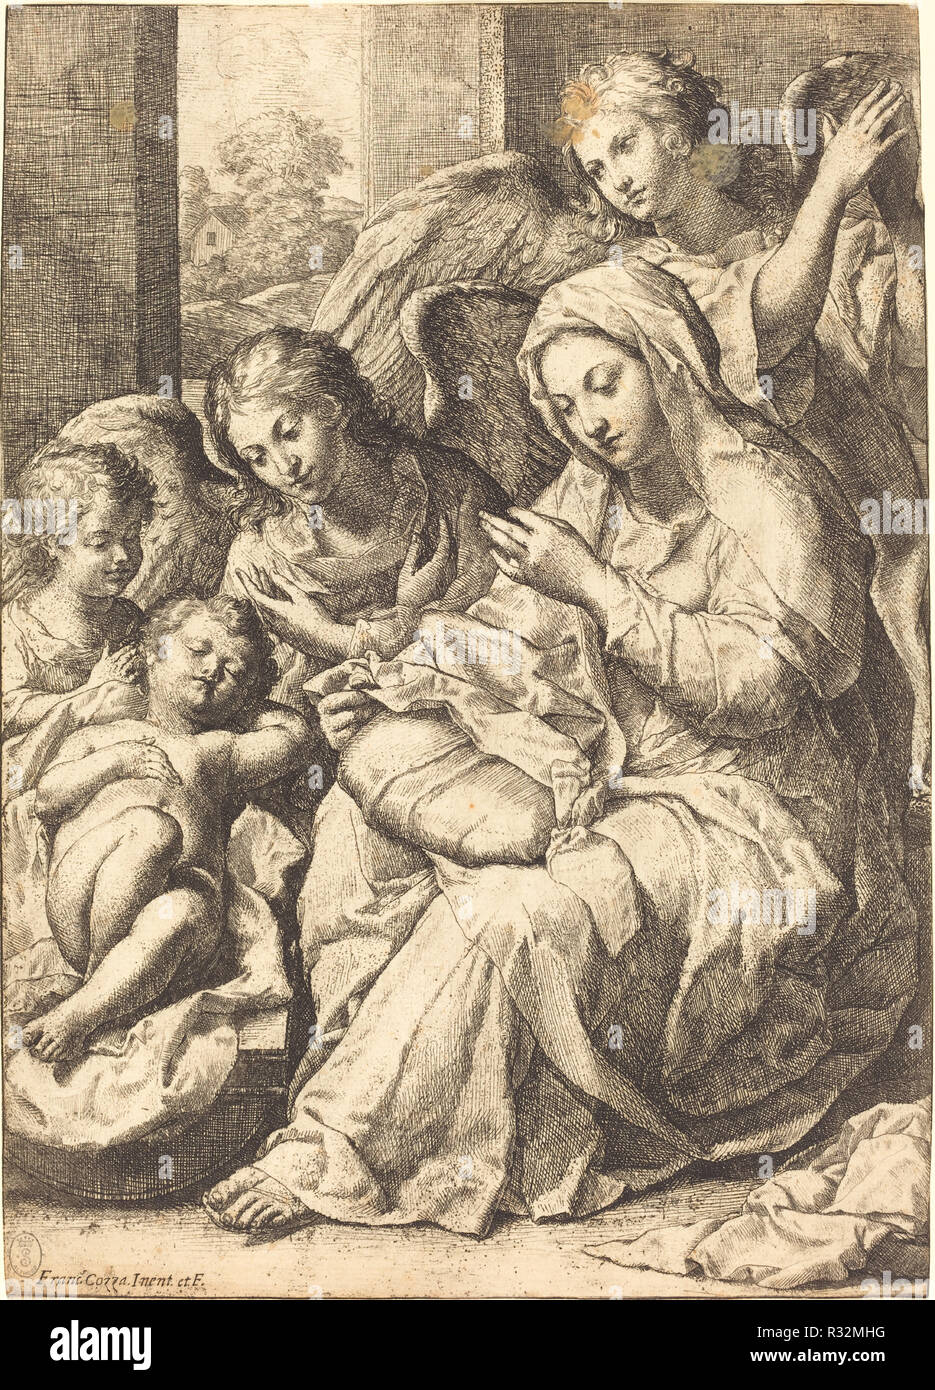 Virgin and Angels Watching Over the Sleeping Infant Jesus. Dimensions: sheet: 30.3 x 21.7 cm (11 15/16 x 8 9/16 in.). Medium: etching in black. Museum: National Gallery of Art, Washington DC. Author: FRANCESCO COZZA. Stock Photo